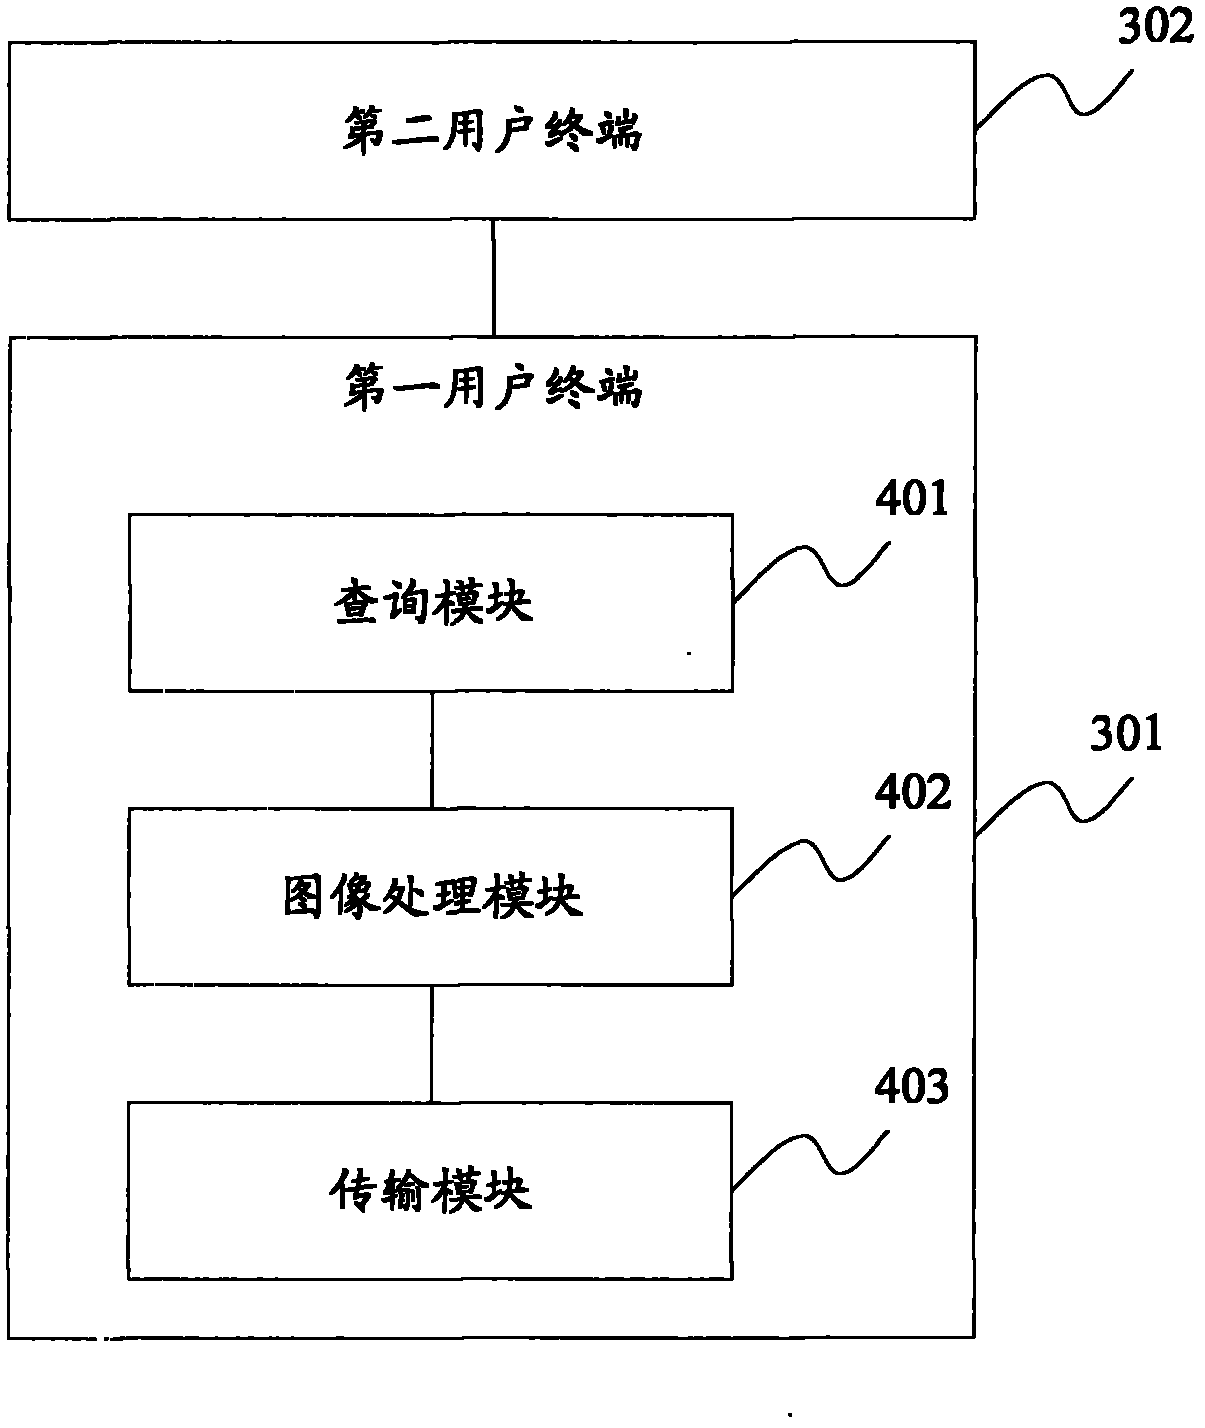 Image processing method, device and system